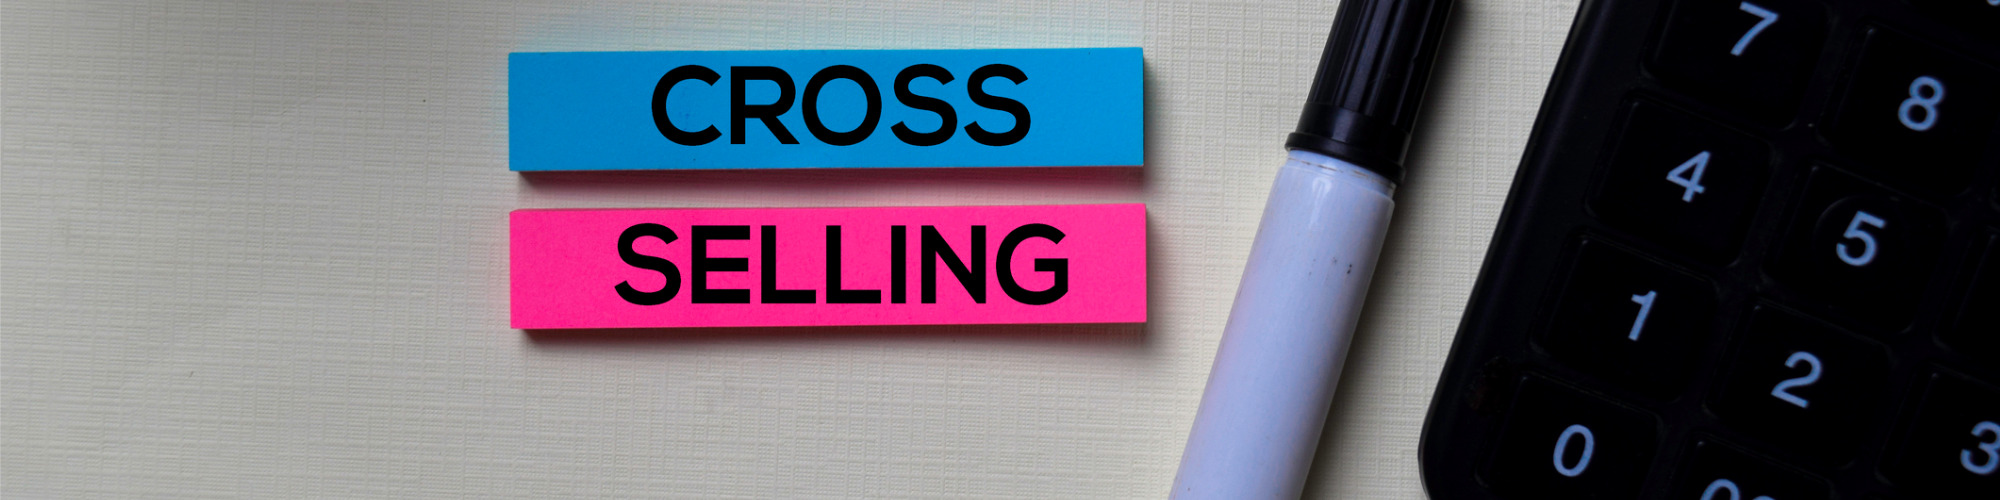 Cross-Selling for Law Firms - Live at Your Desk with Tony Reiss